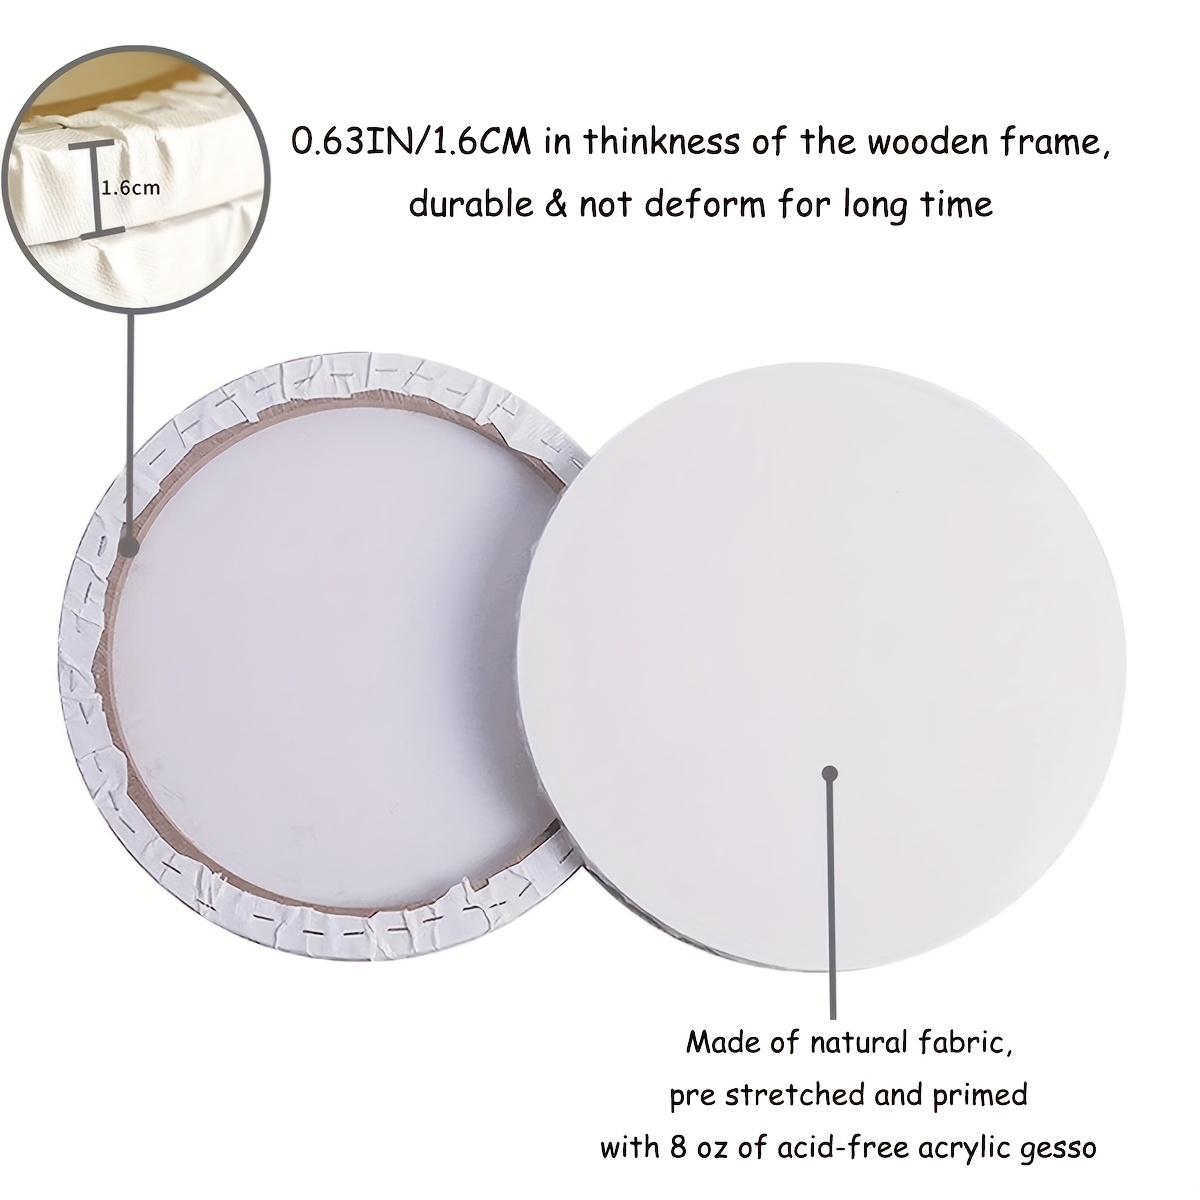 Round Painting Canvas Panel Blank Panel Canvas Drawing Board for